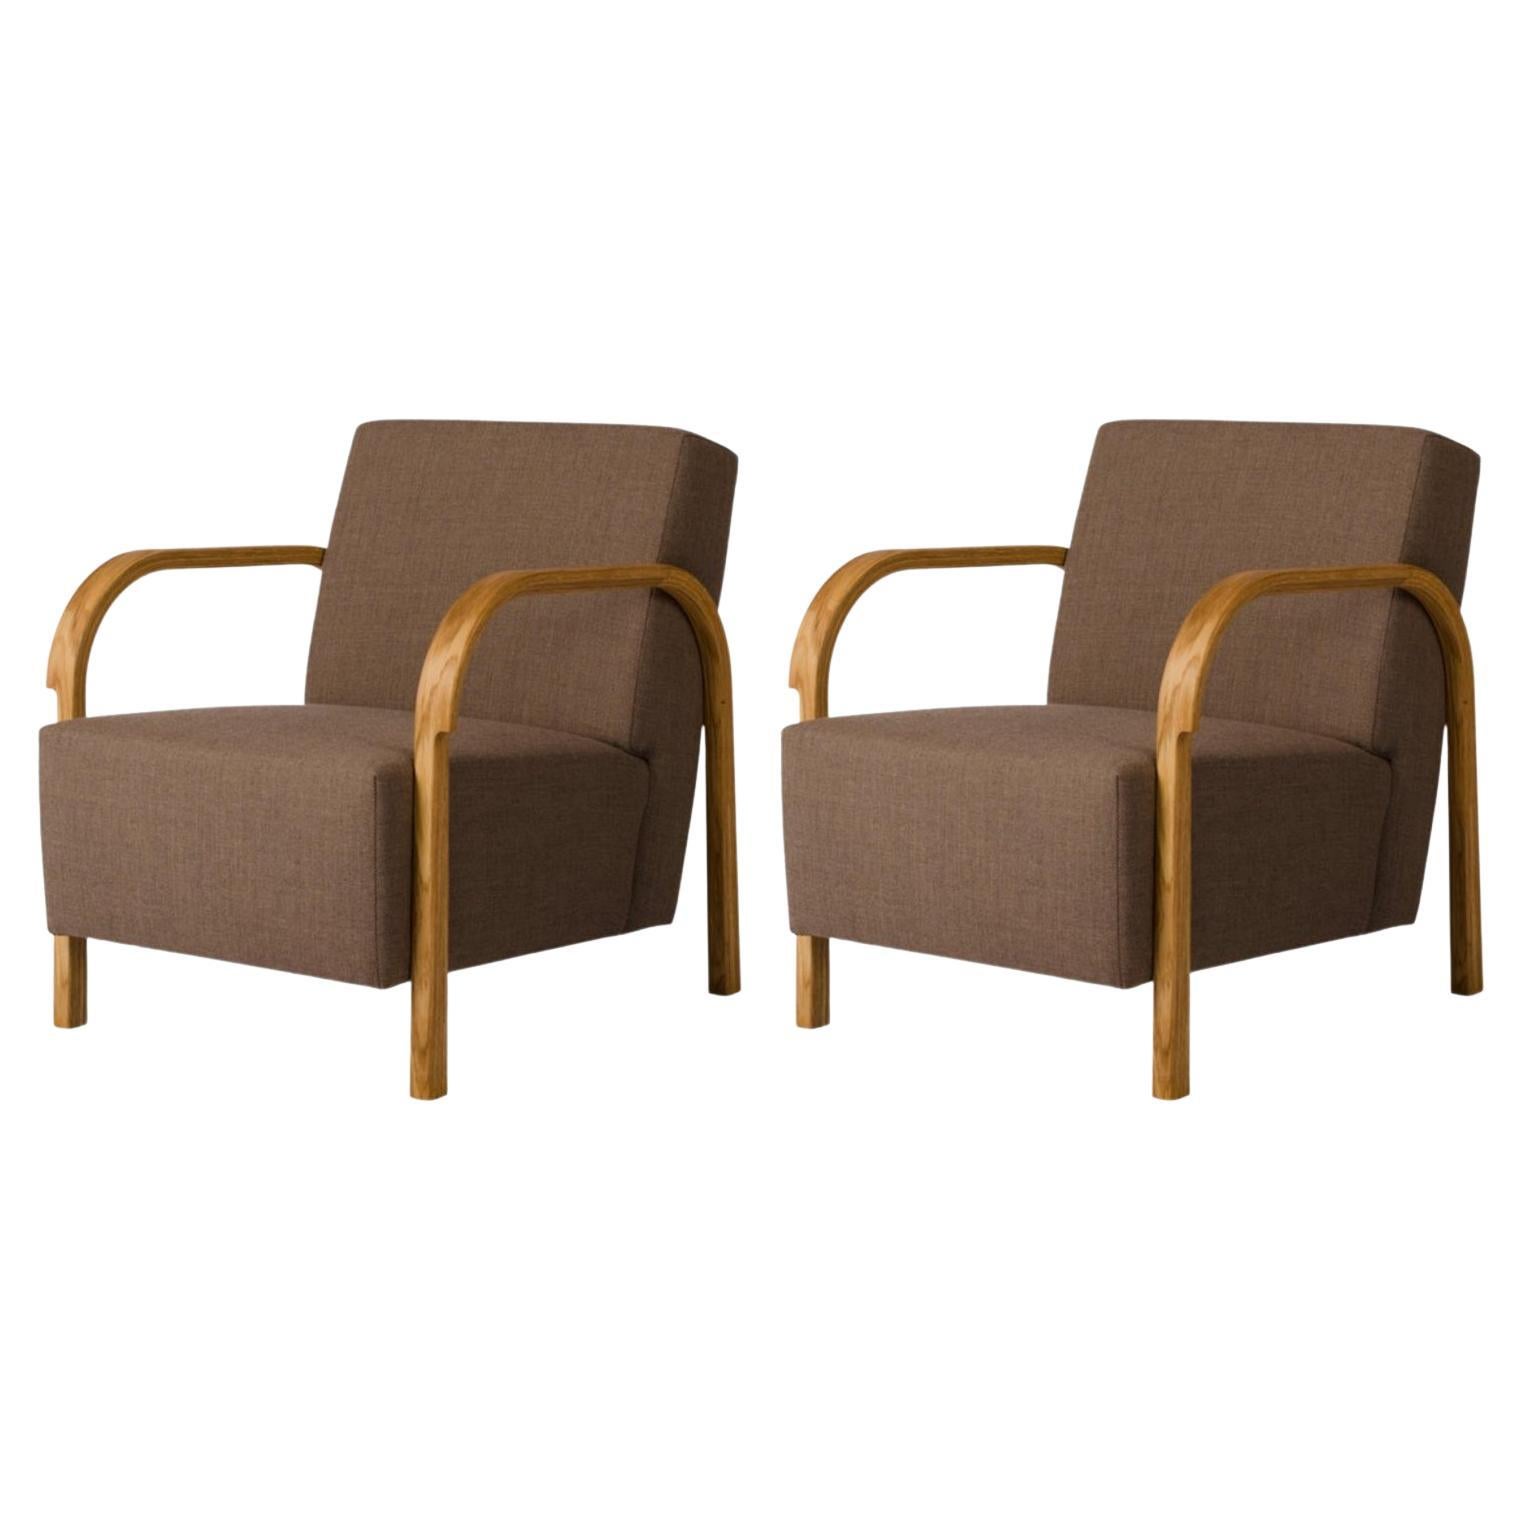 Set of 2 Kvadrat/Hallingdal & Fiord Arch Lounge Chairs by Mazo Design